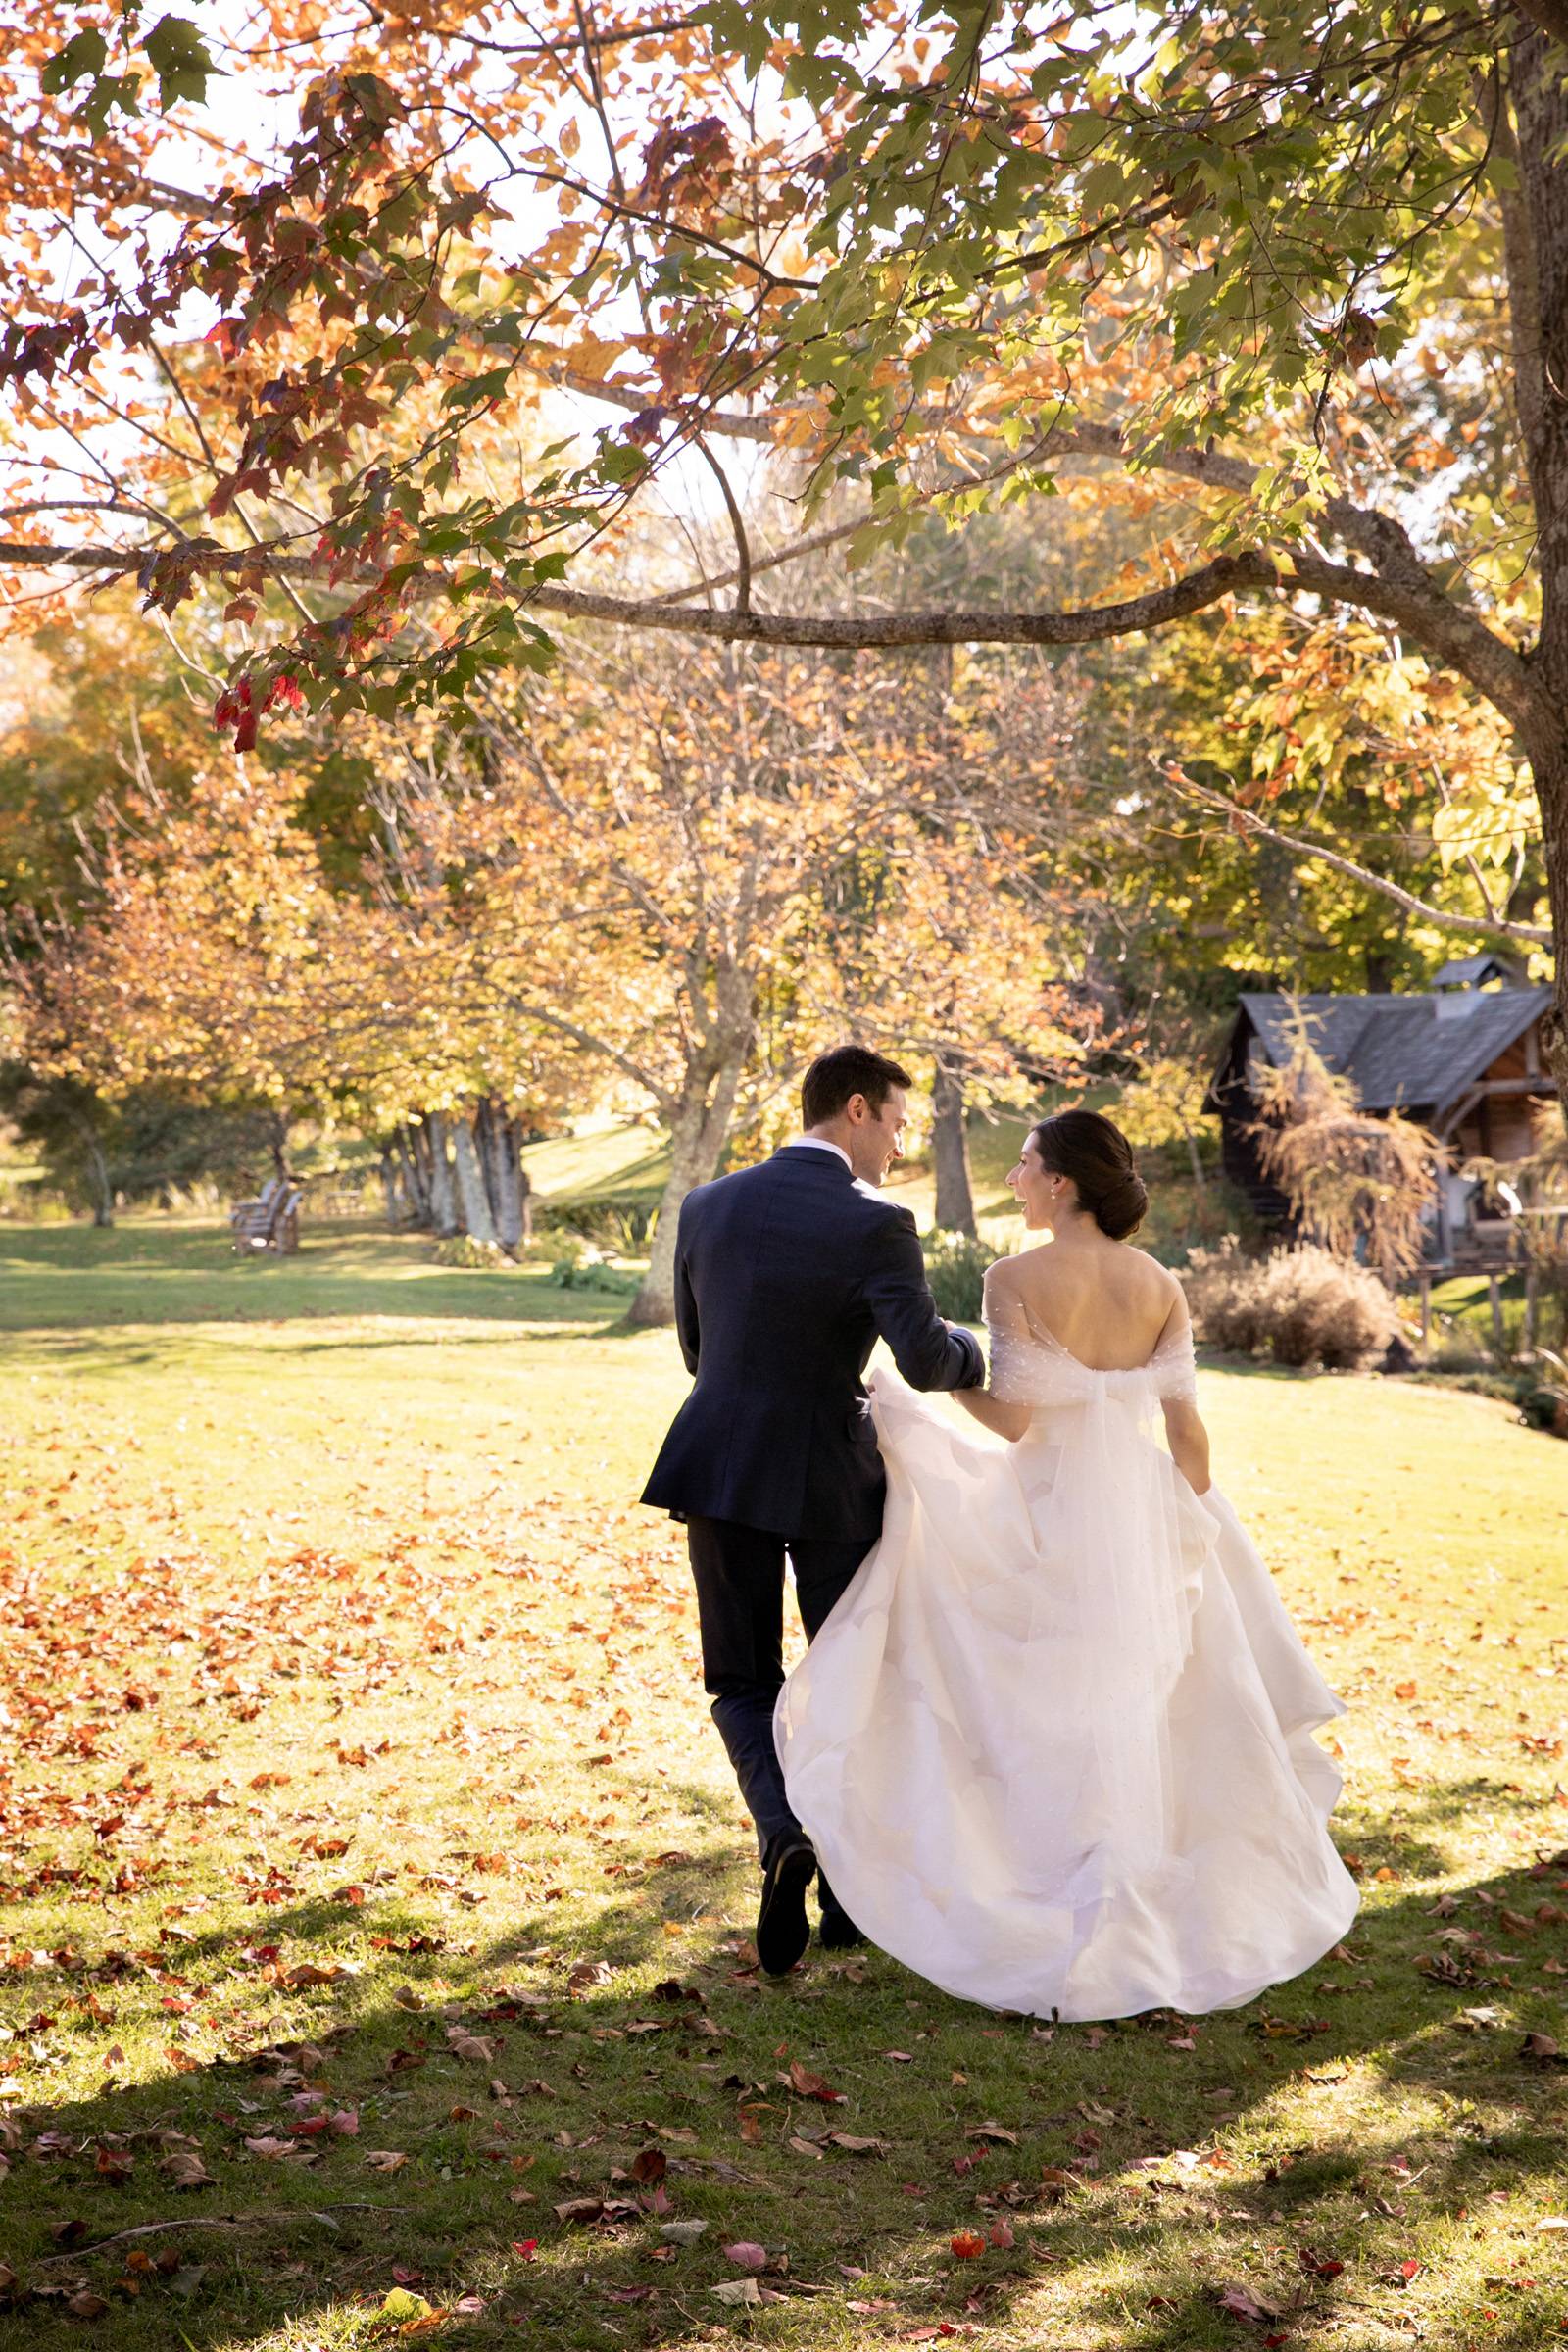 Bride and groom walking under tree after ceremony on fall wedding day in Vermont